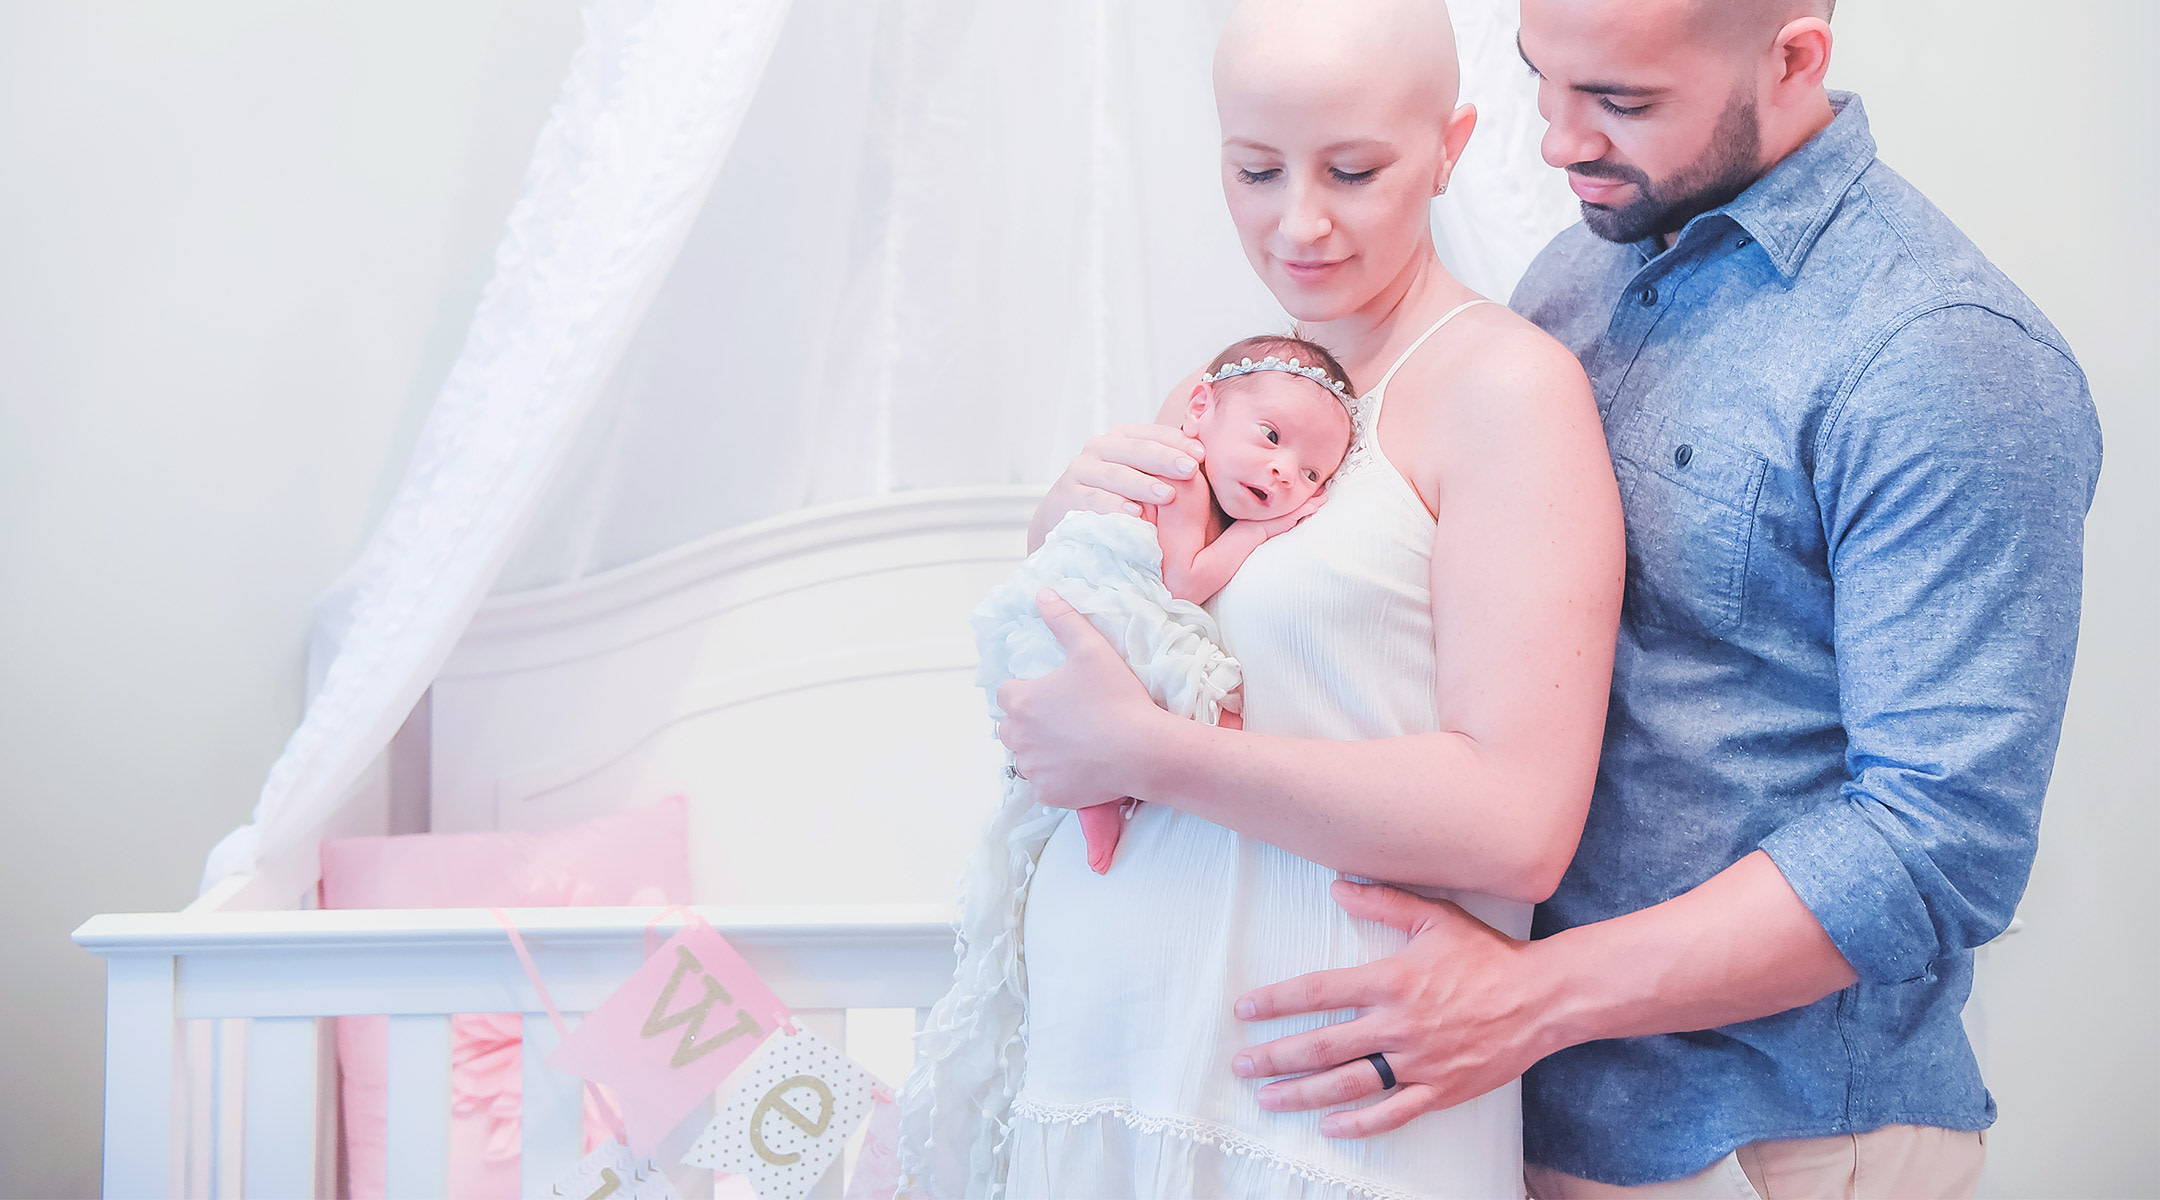 mom who was diagnosed with cancer during her pregnancy, with her newborn baby and partner.